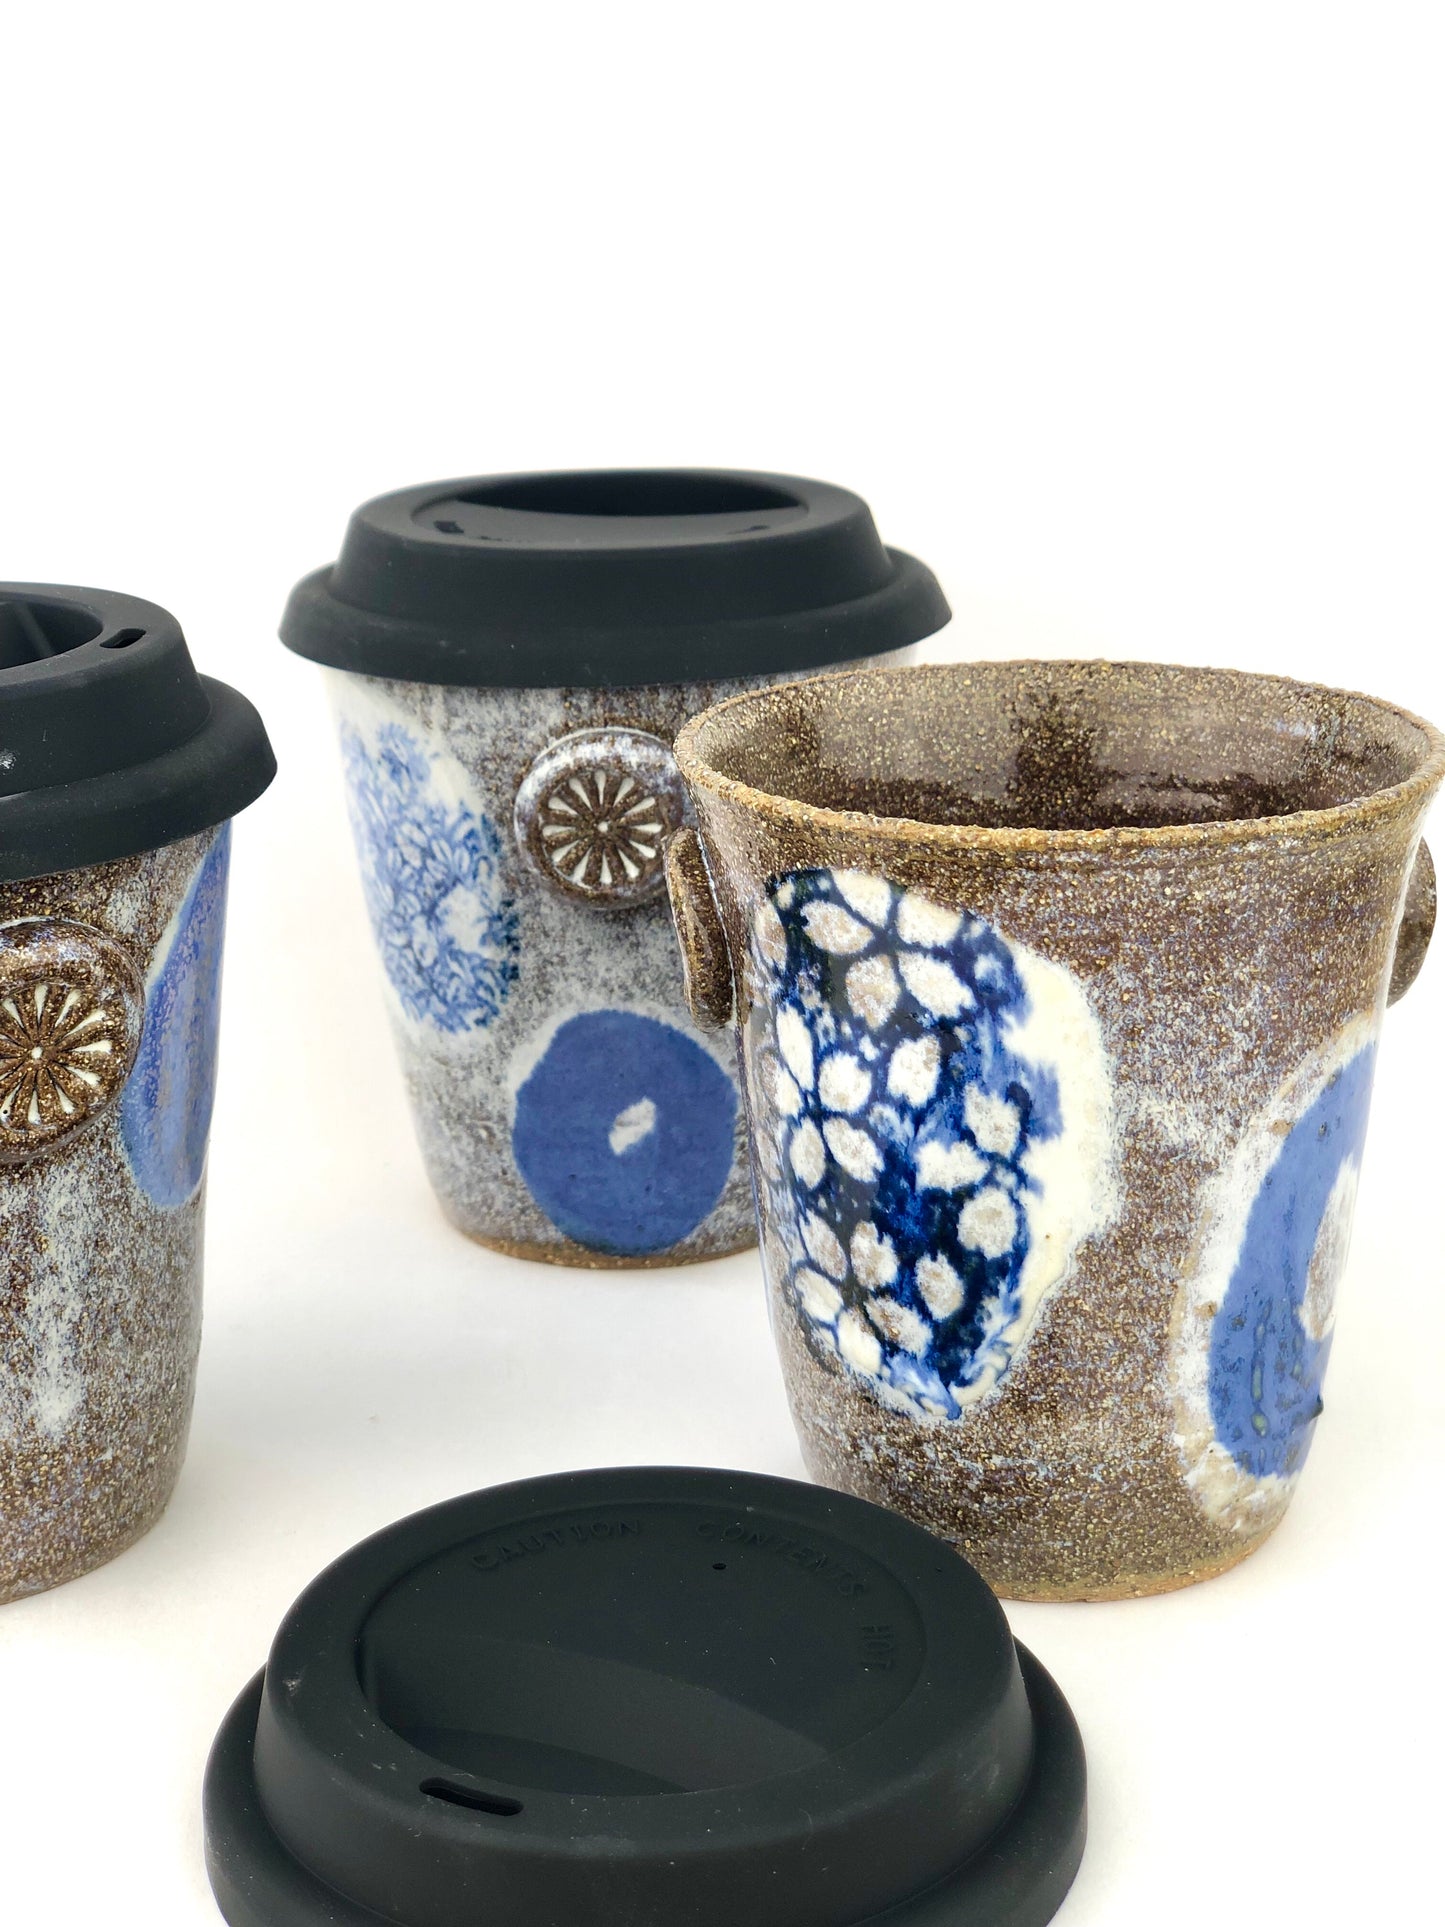 Conglomerate Ceramic Holding Cup  ✨ 50% off